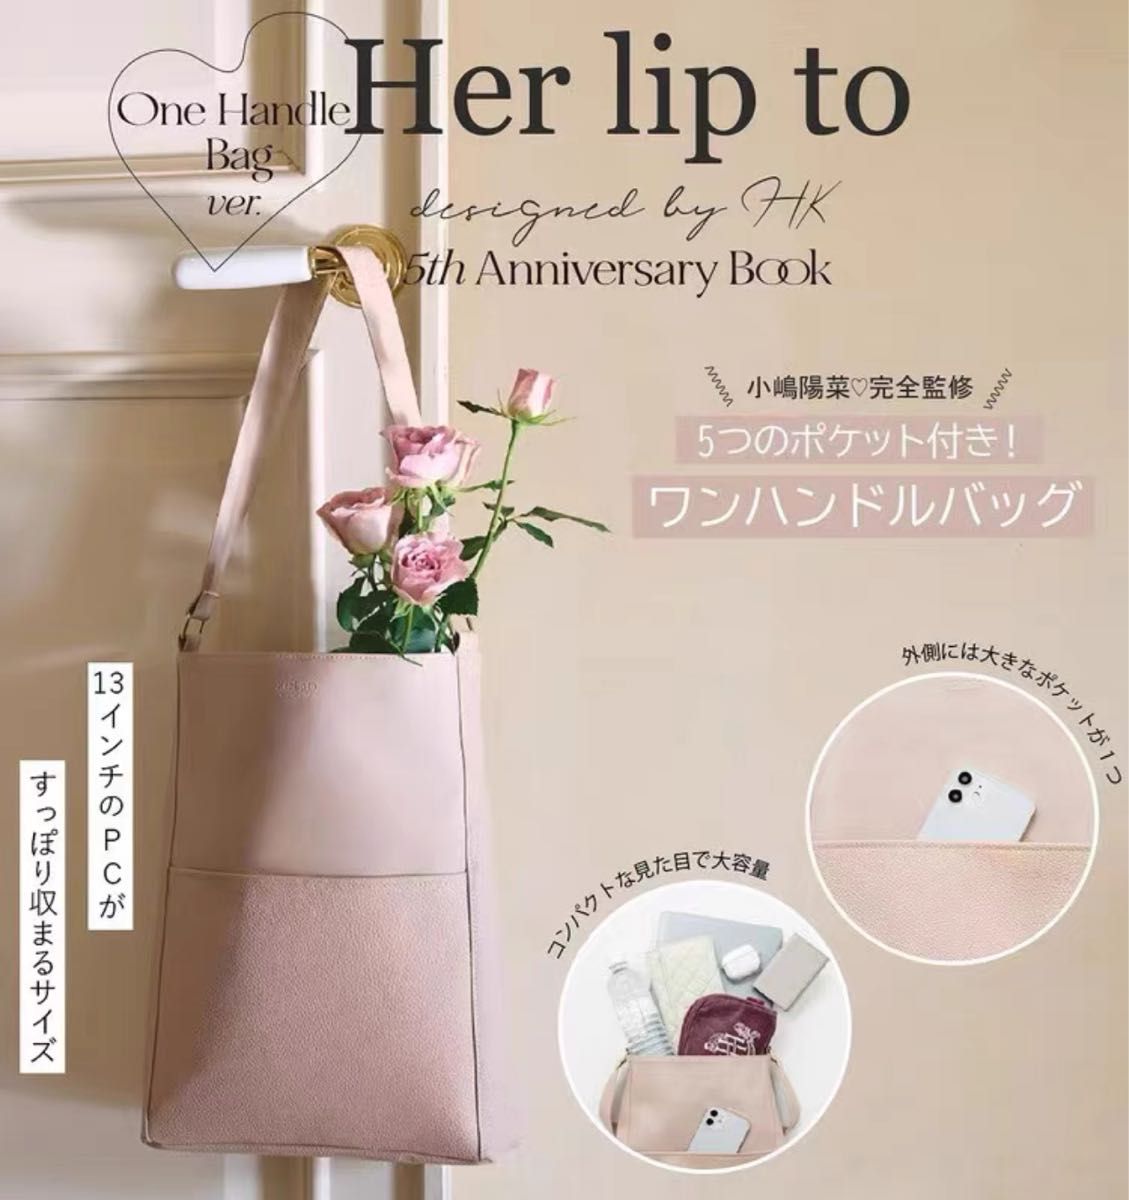 Her lip to 5th Anniversary Book バッグ